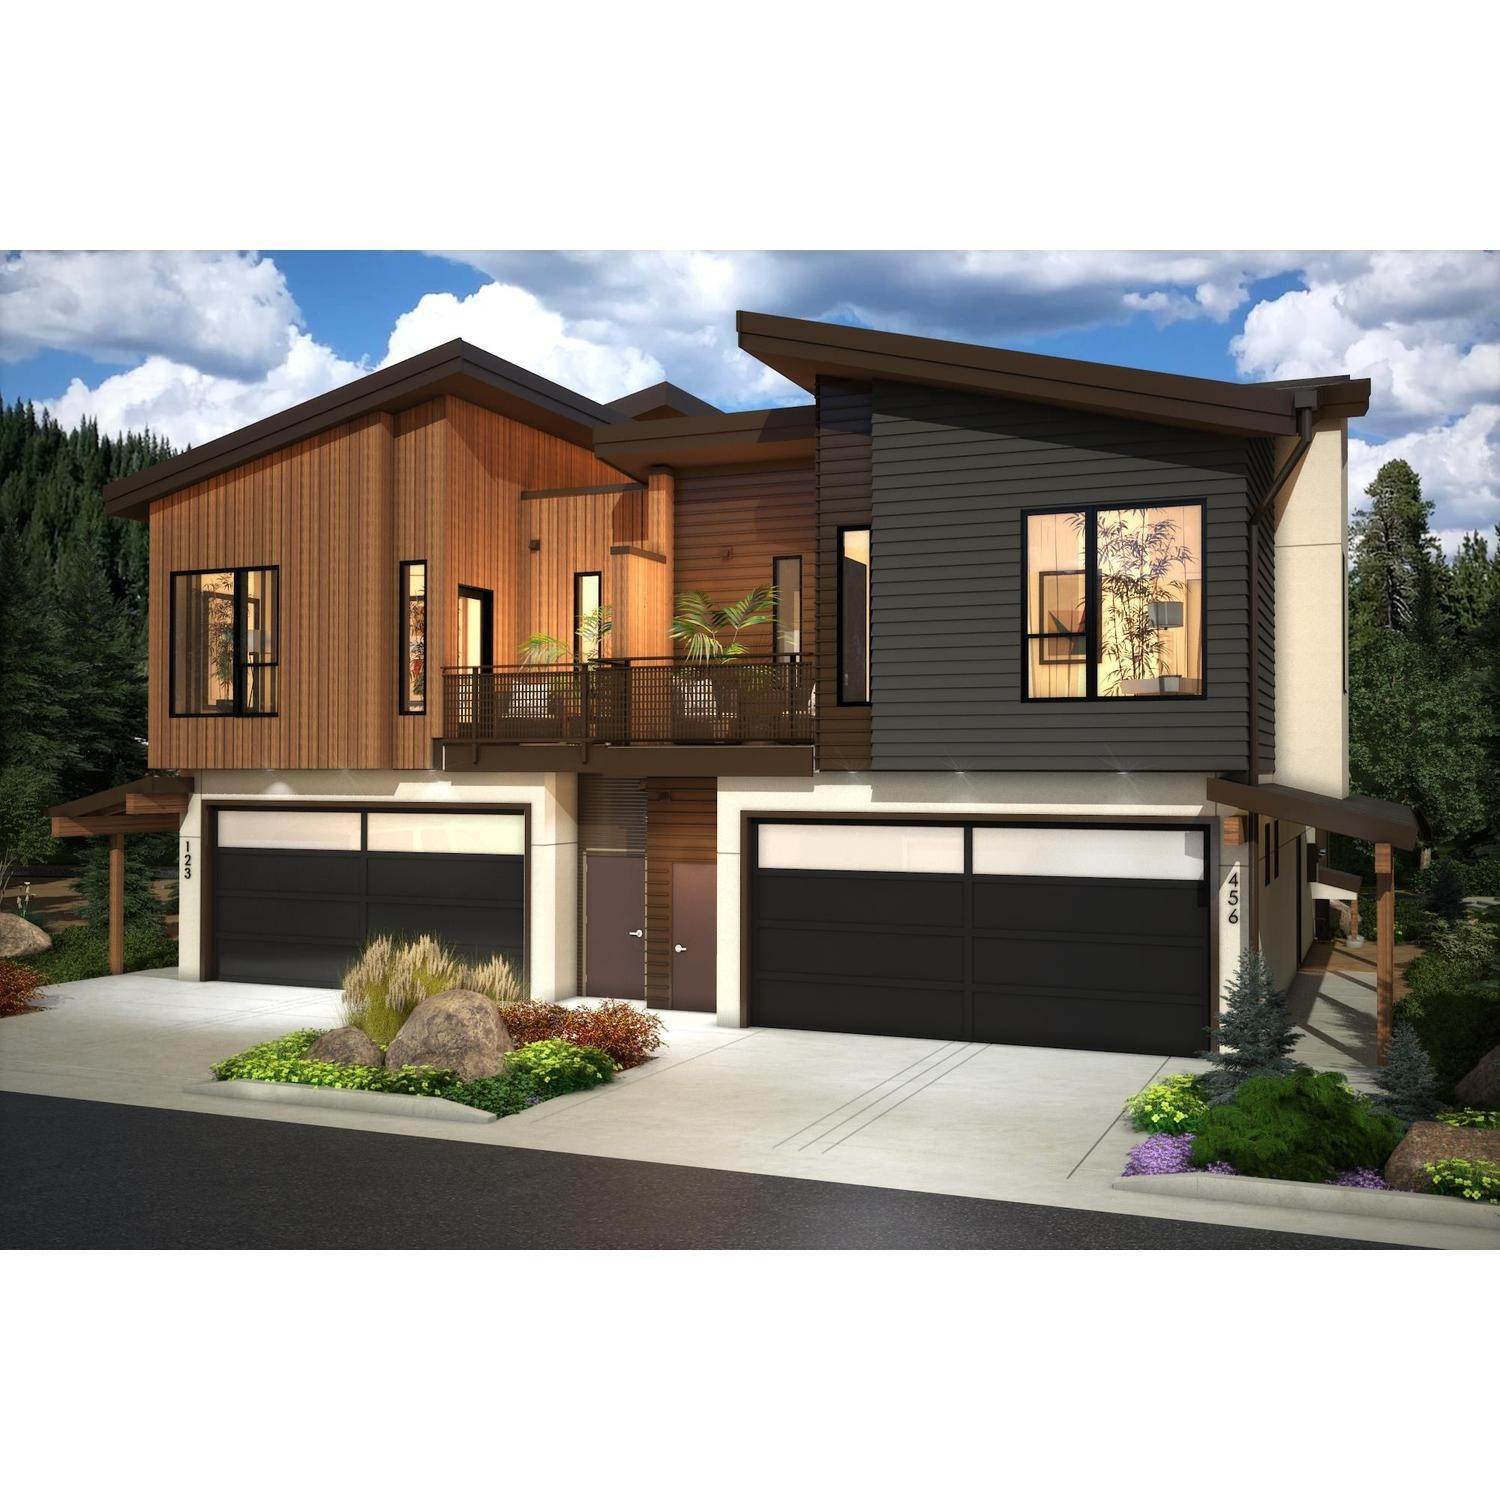 Single Family for Active at Elements At Coldstream - Terra 12869 Ice House Loop TRUCKEE, CALIFORNIA 96161 UNITED STATES